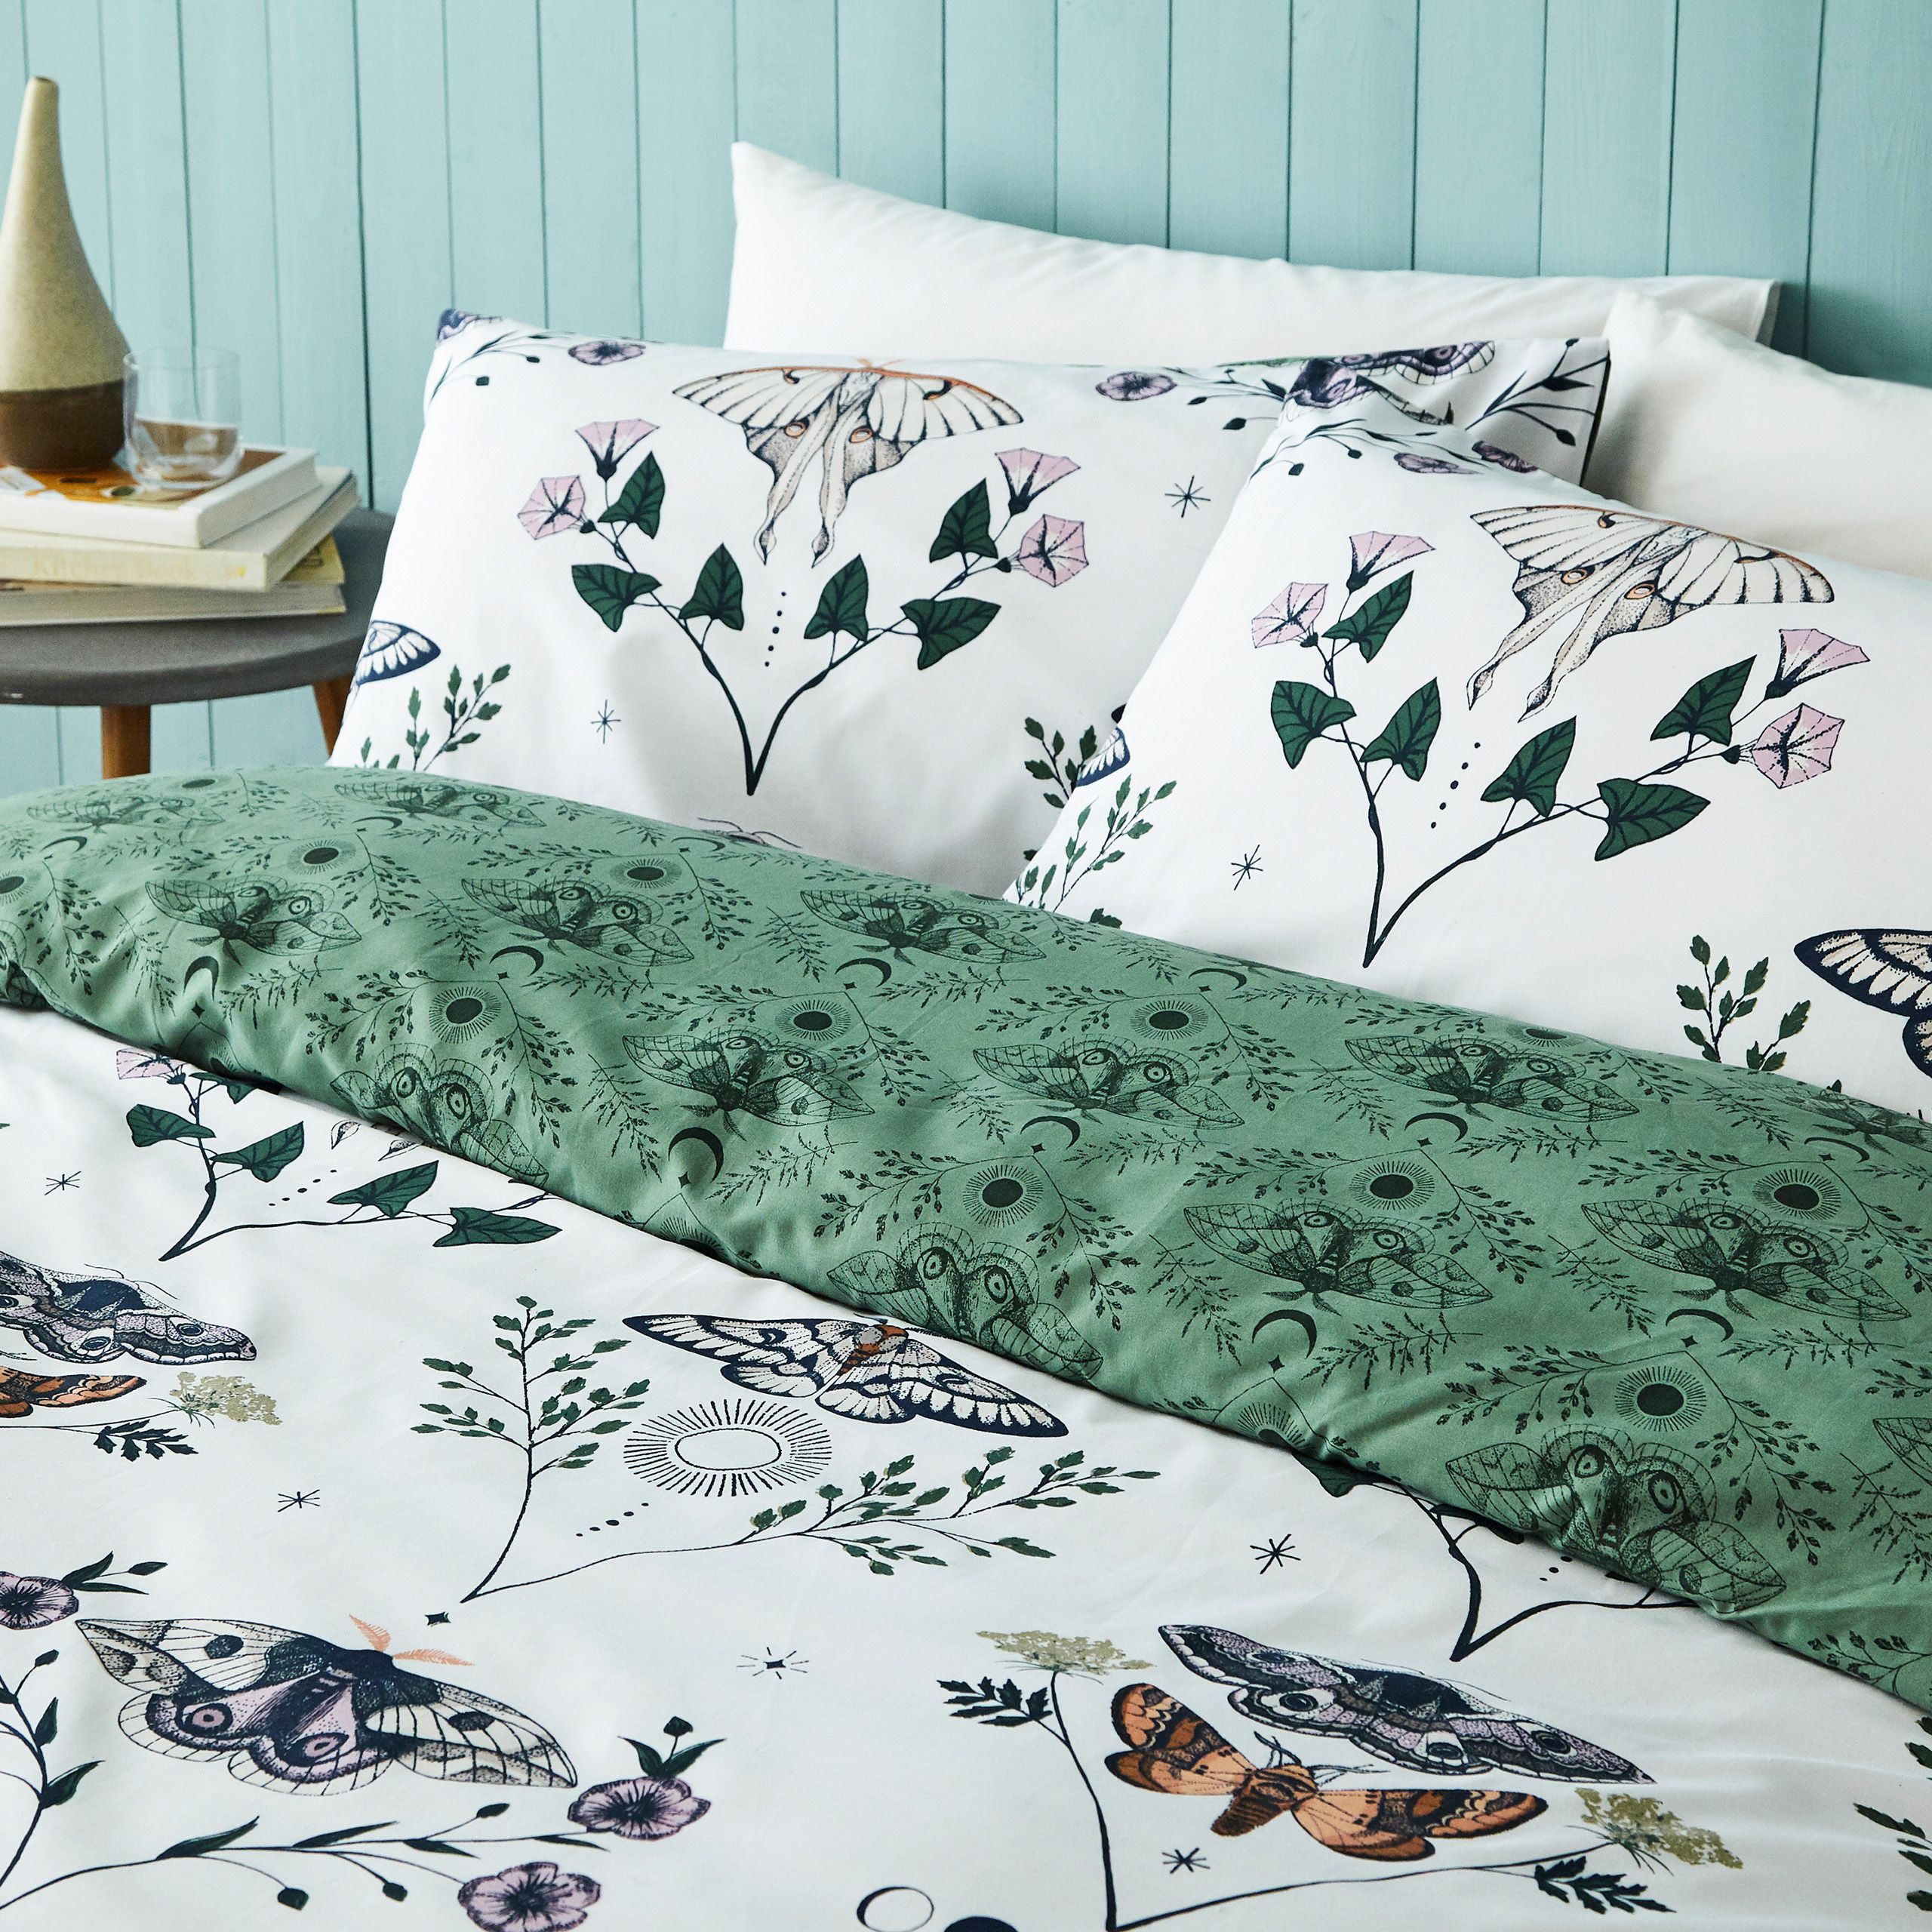 Glide through the Madagascan air with the Chrysirida Duvet Cover Set. The reverse features a complementing colour with matching design for an alternative look when you need it.